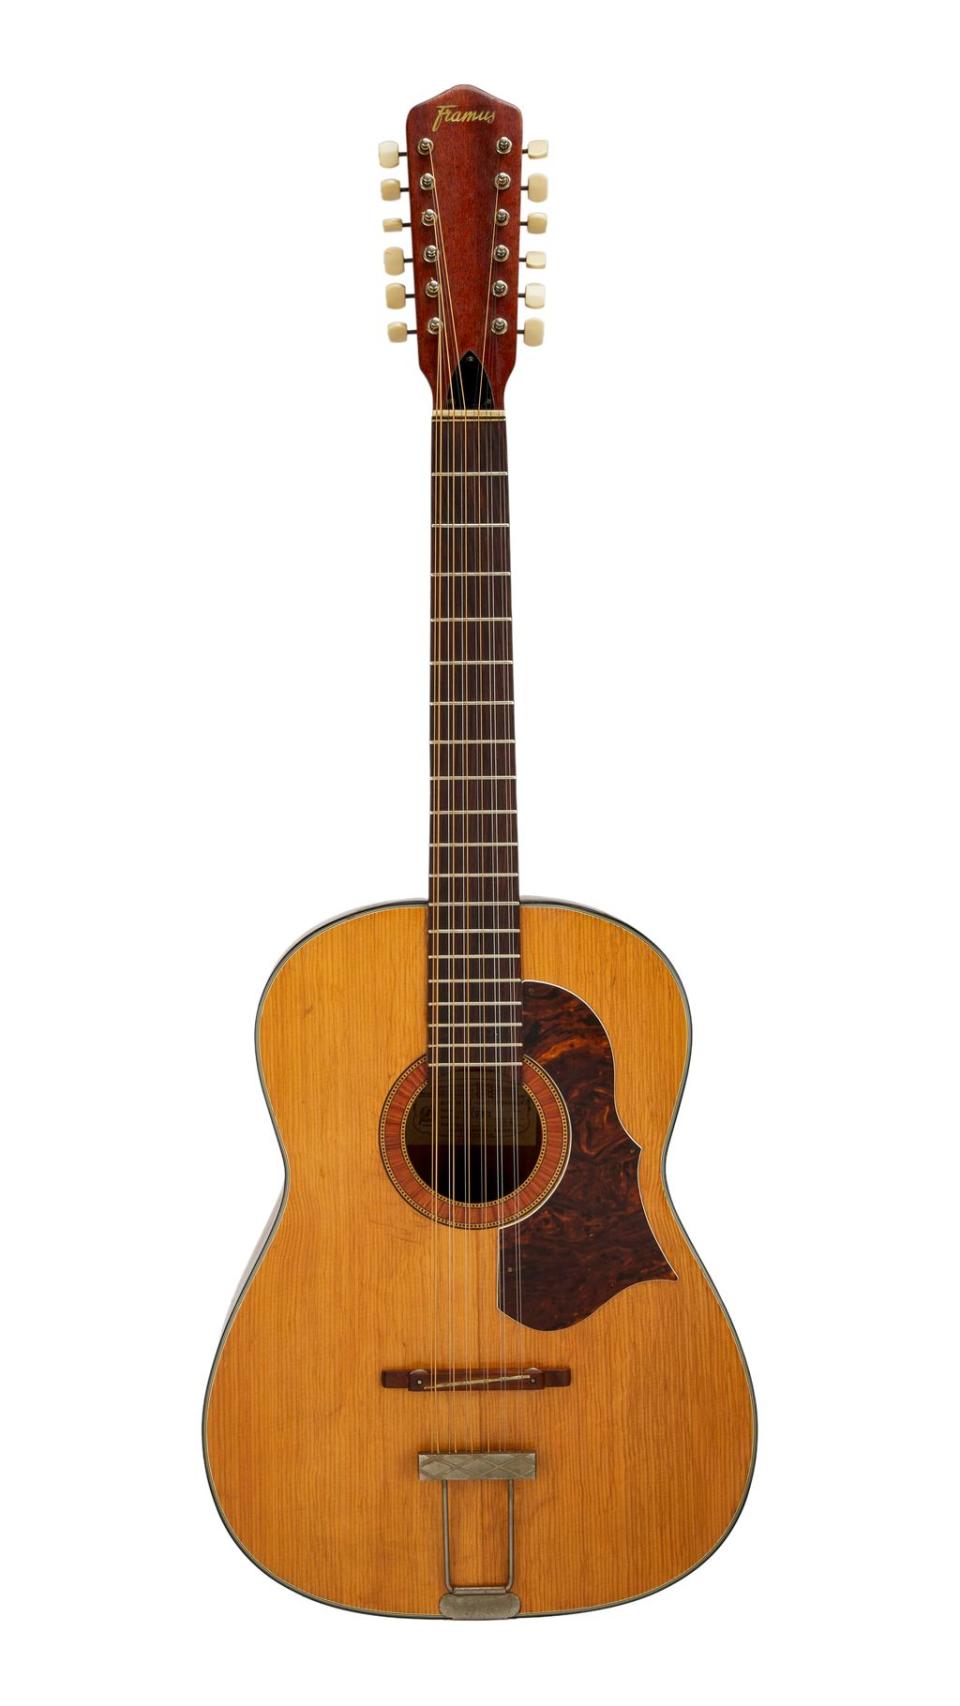 Believed to be lost, the Framus 12-string Hootenanny acoustic guitar, used in the recording of The Beatles’ Help! album and film, had been unseen for more than 50 years (Julien’s Auctions/PA)